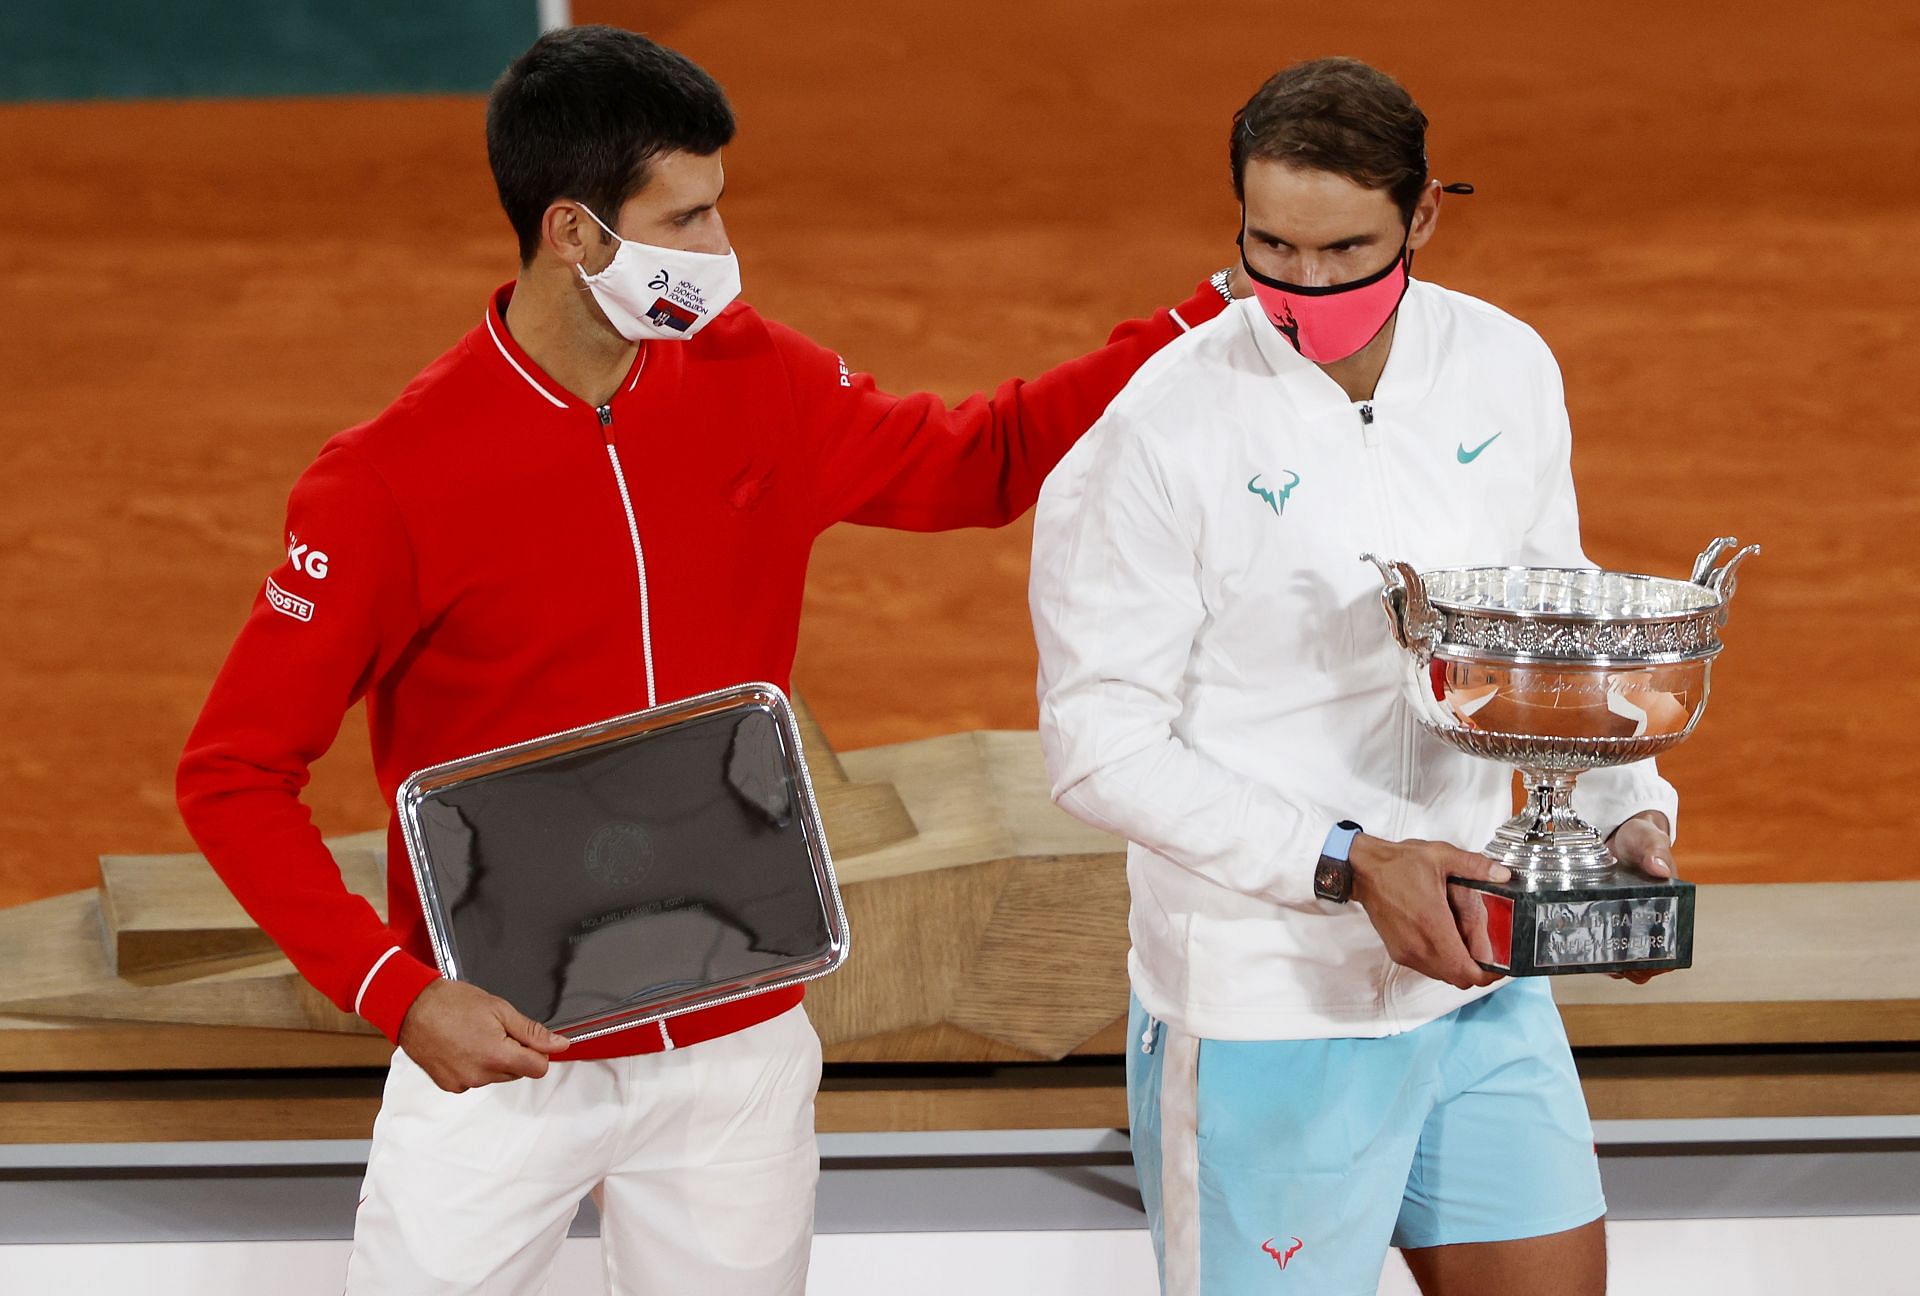 Novak Djokovic and Rafael Nadal after the 2020 French Open final